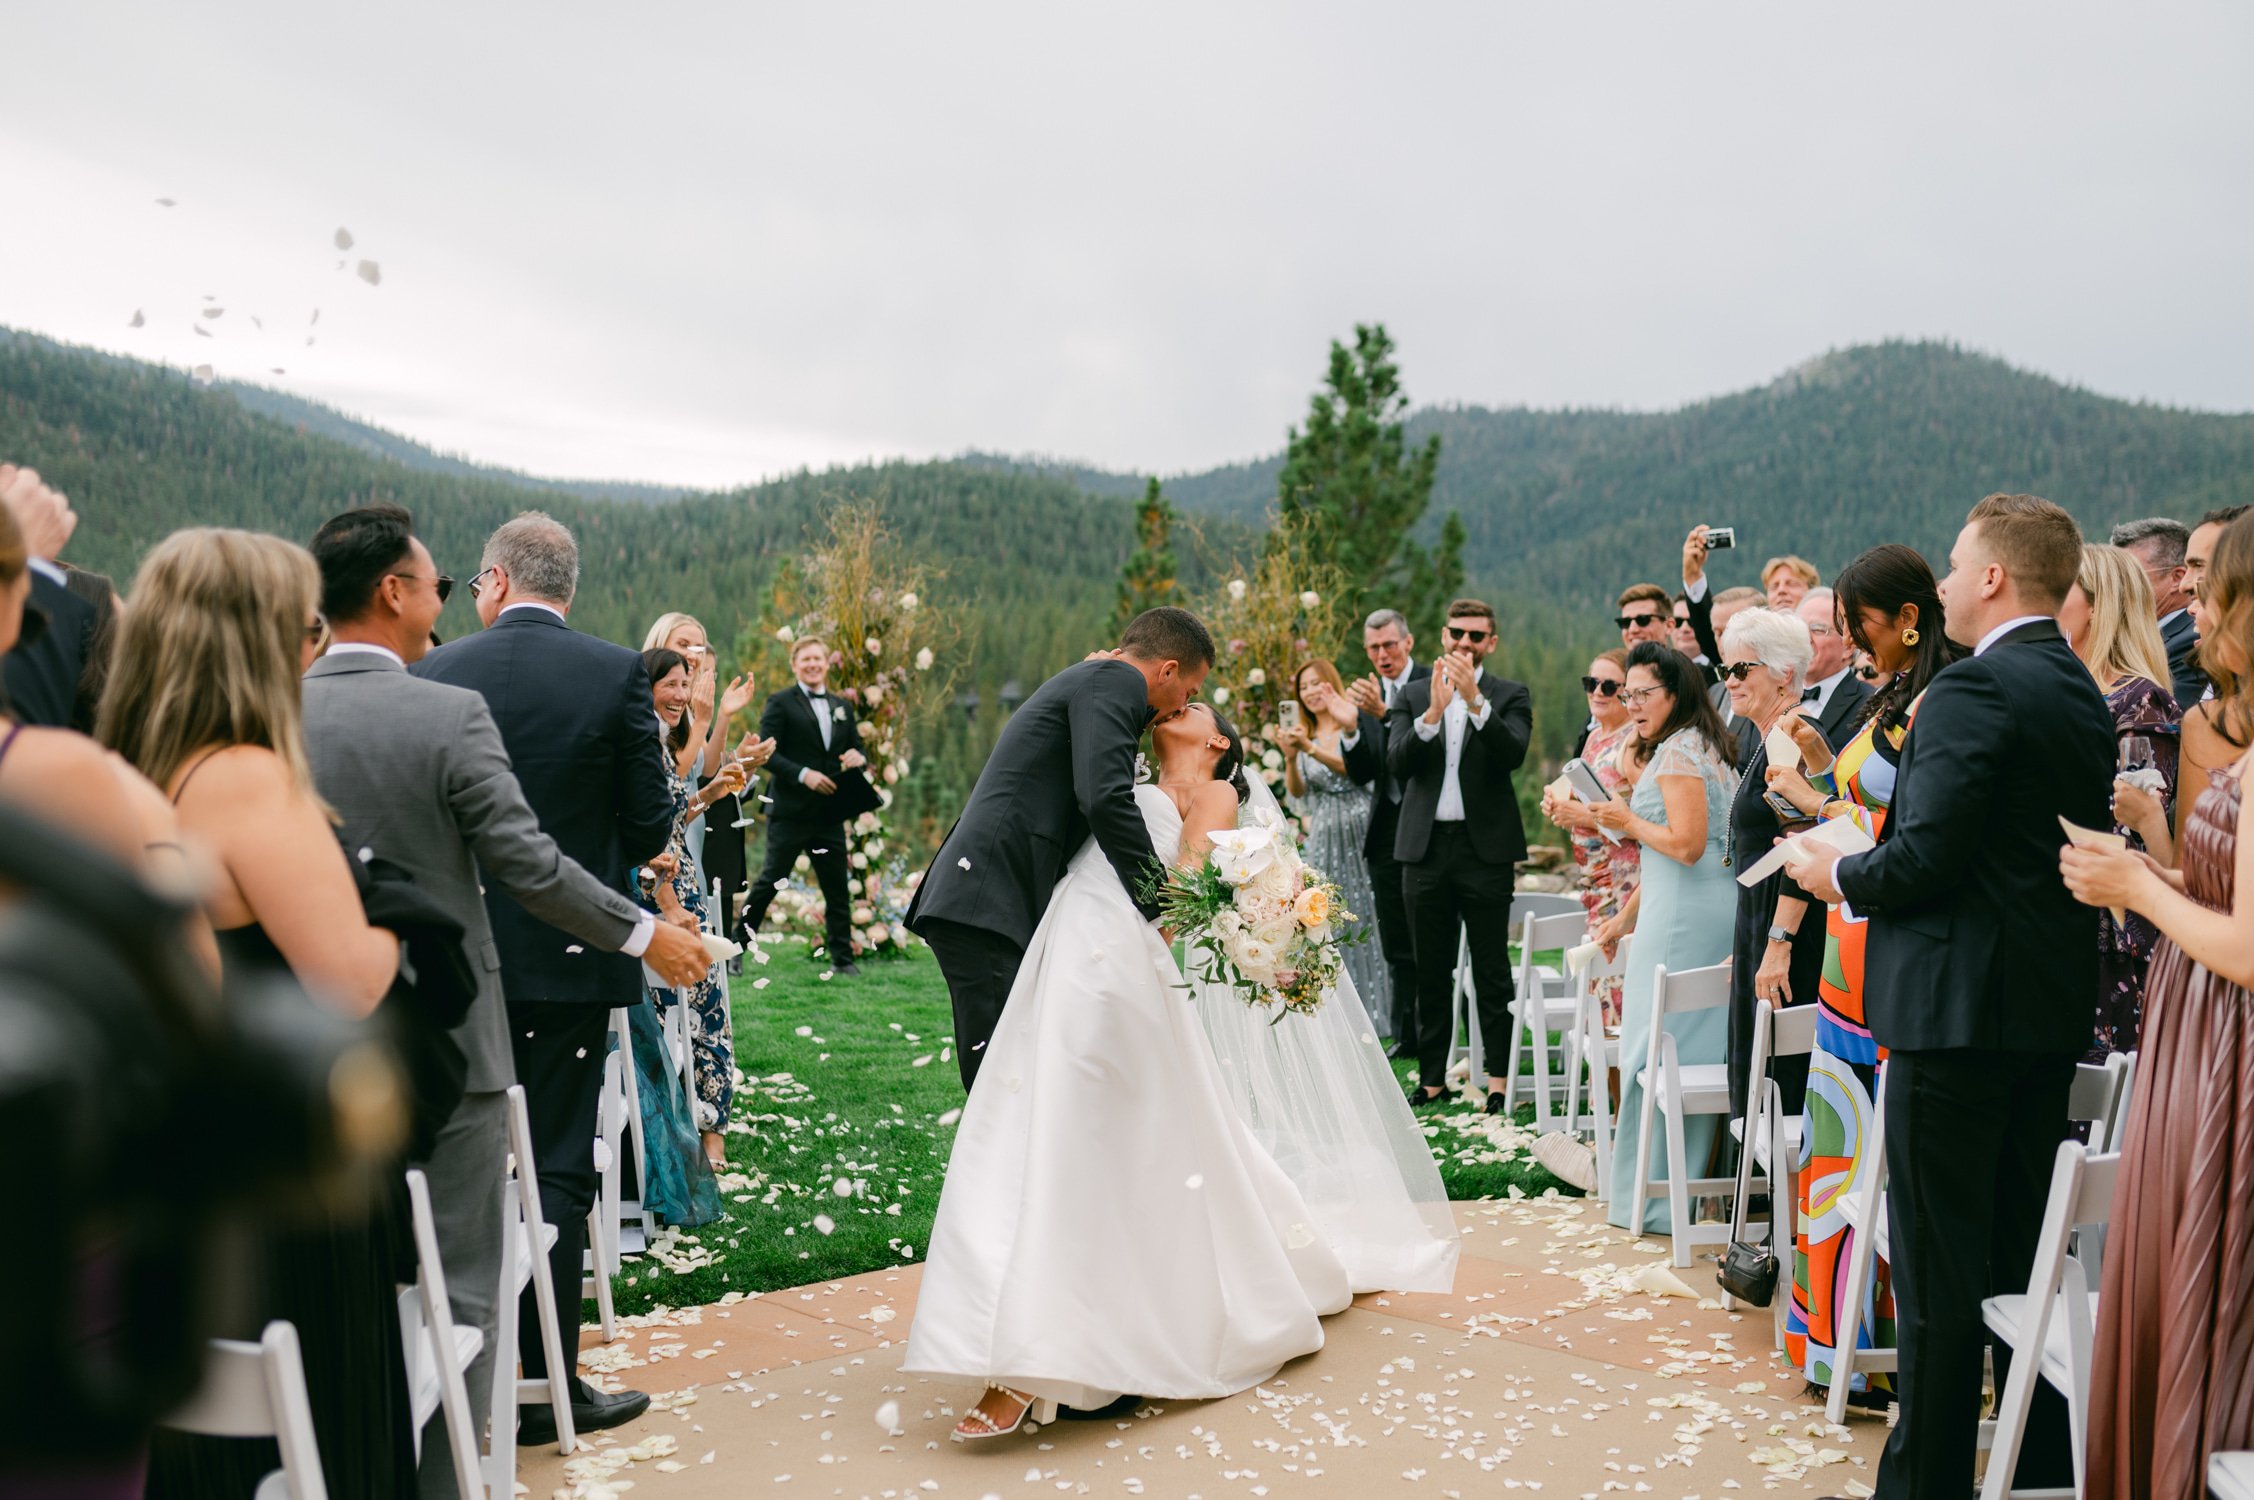 Martis Camp Wedding, photo of the newlywed couple kissing down the aisle as the guest applaud